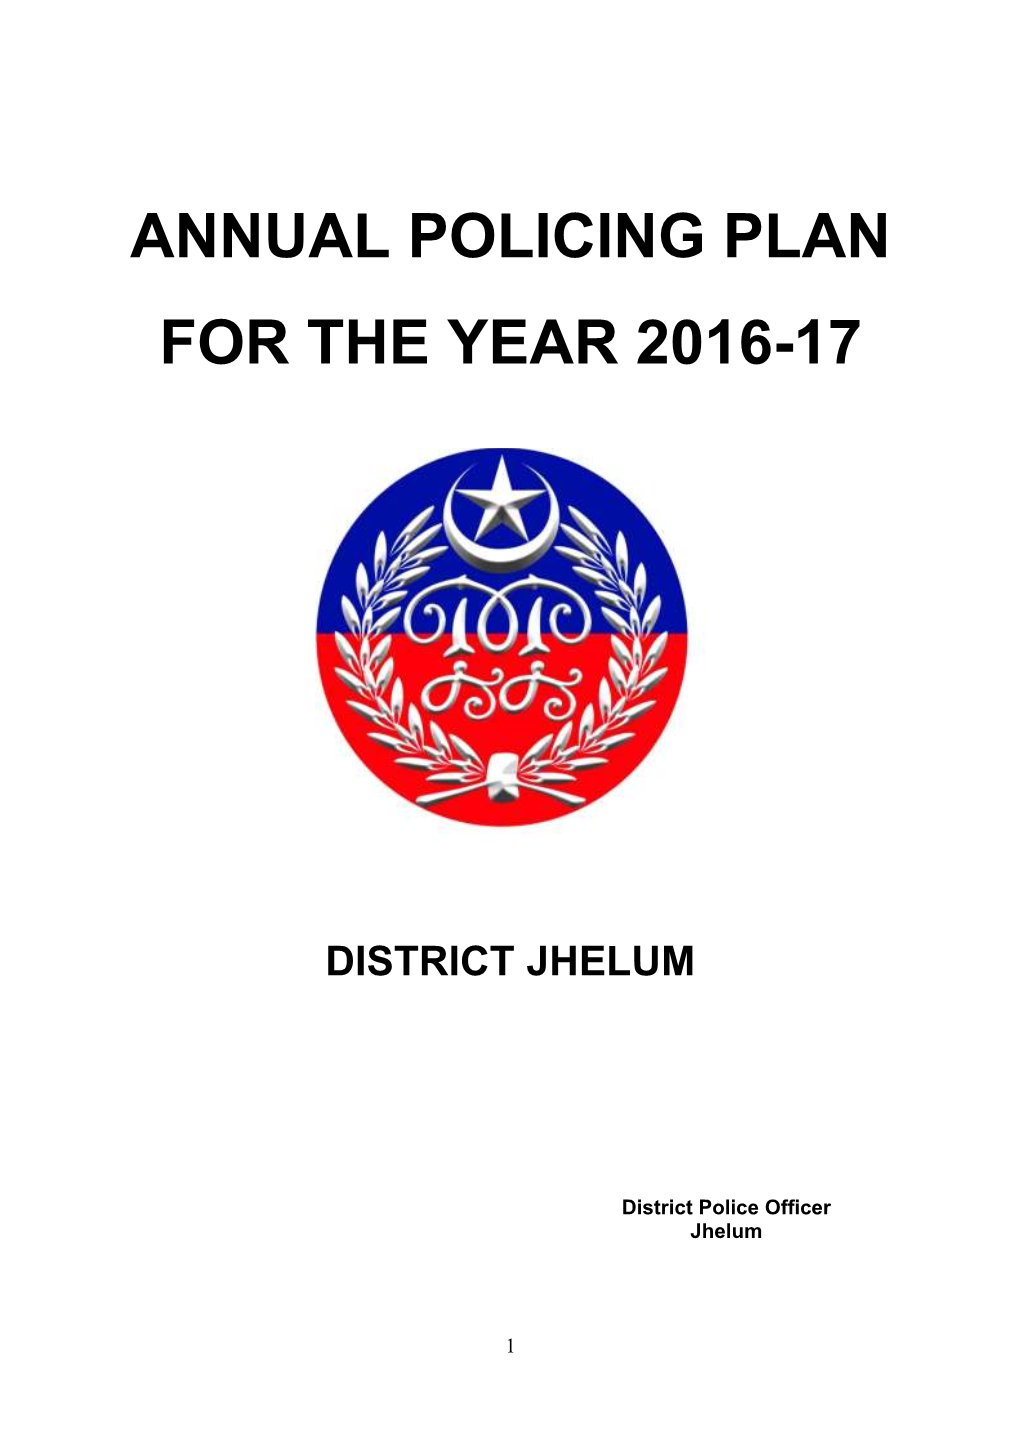 Annual Policing Plan for the Year 2016-17 District Jhelum